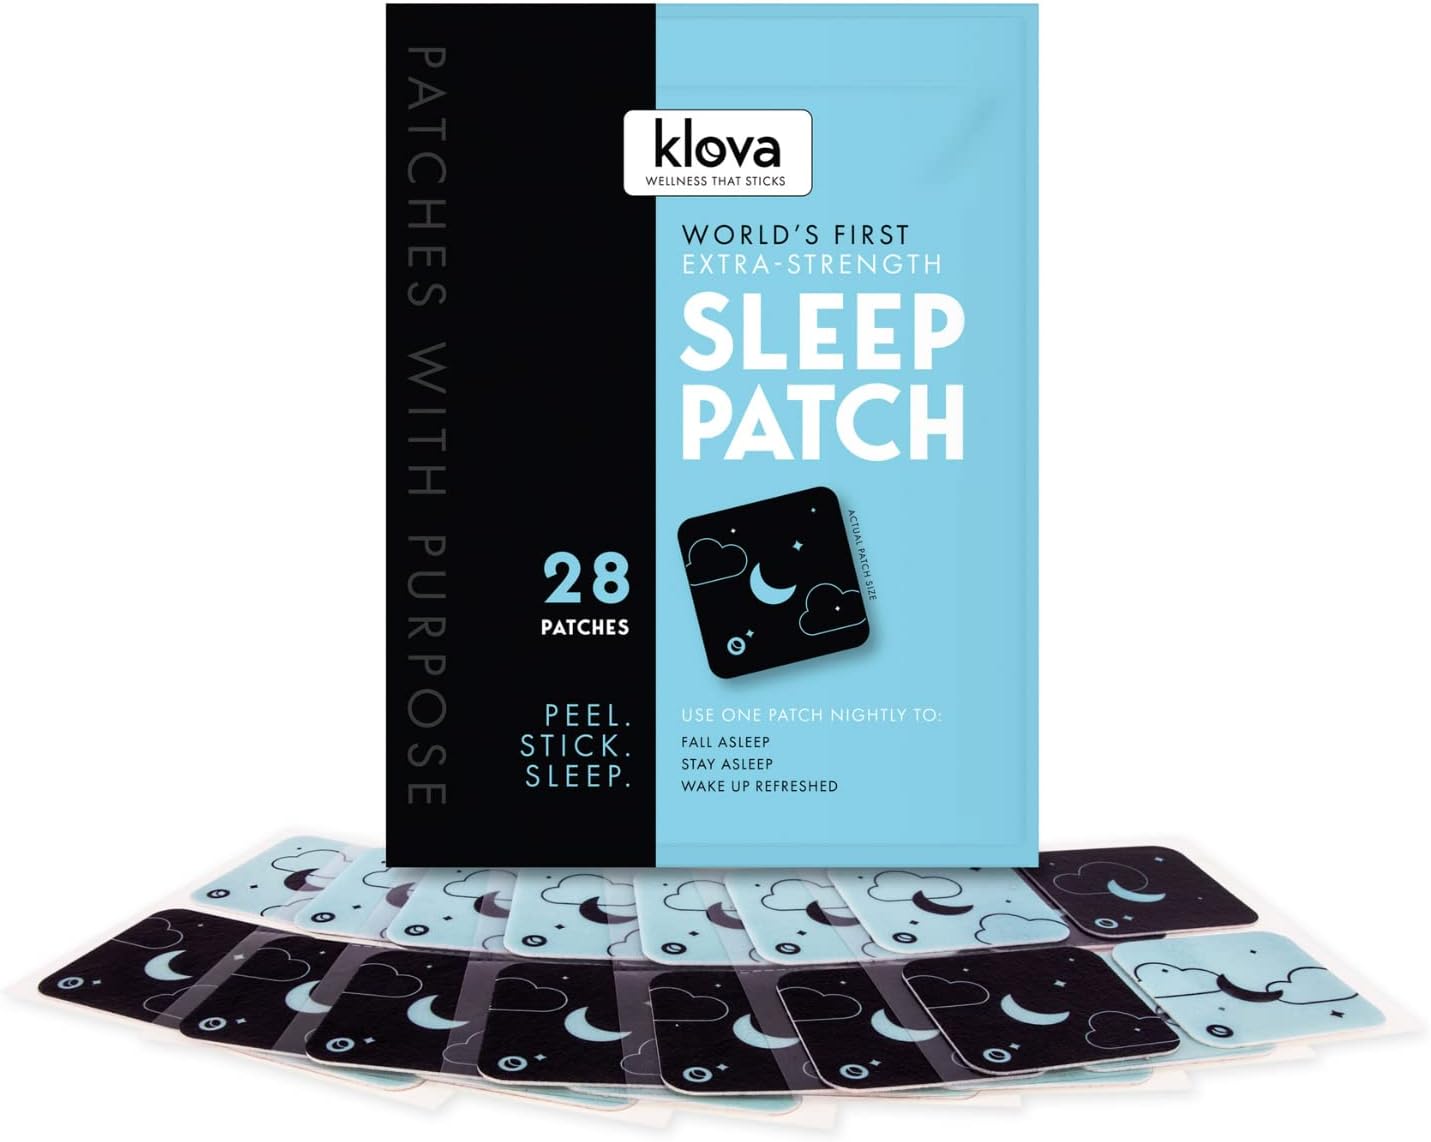 Extra Strength Sleep Patches for Staying Asleep Longer & Fog-Free Morning Energy, Now with 6mg Melatonin, Powerful Deep Sleep Promoting Naturals Like Valerian, Passion Flower, L-Theanine & More